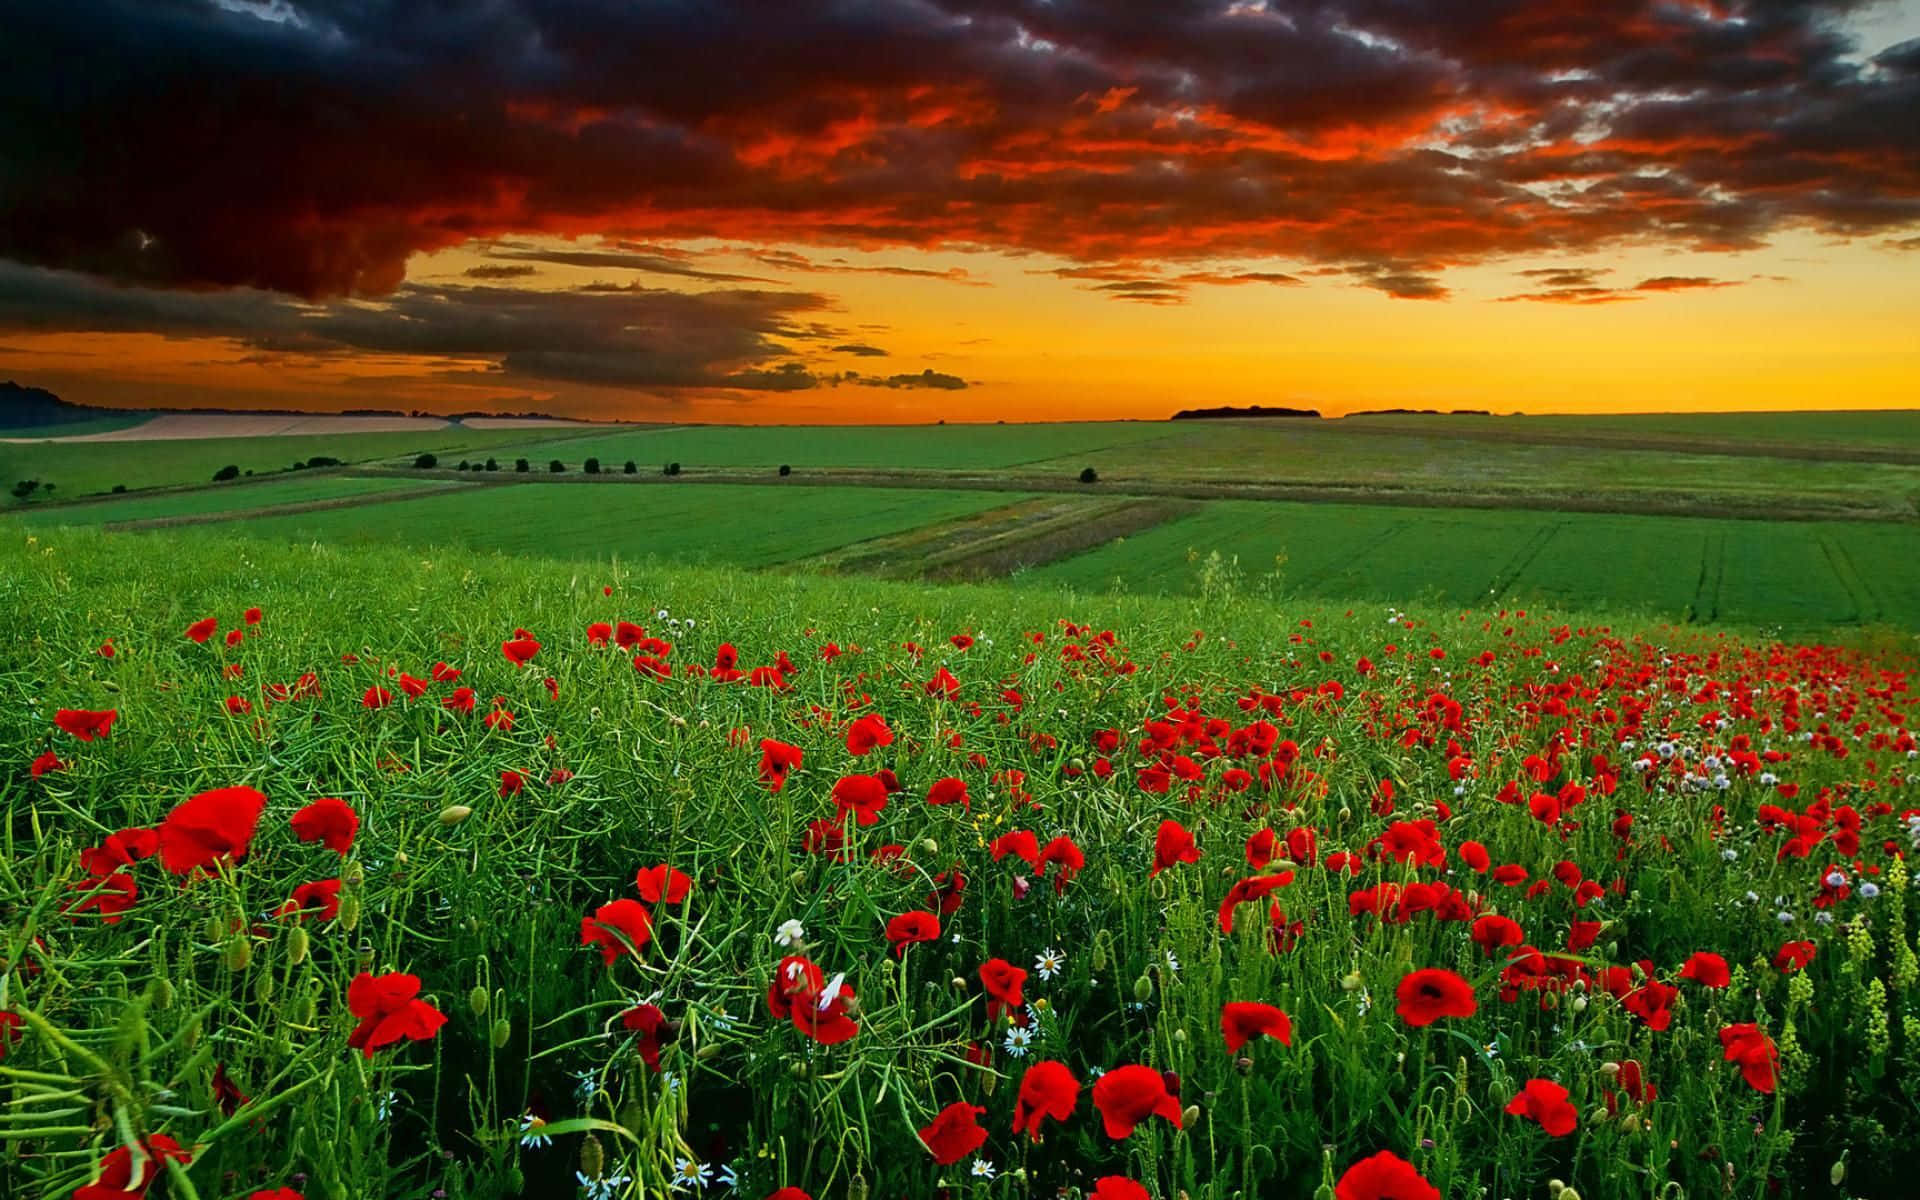 a field of red poppies under a cloudy sky